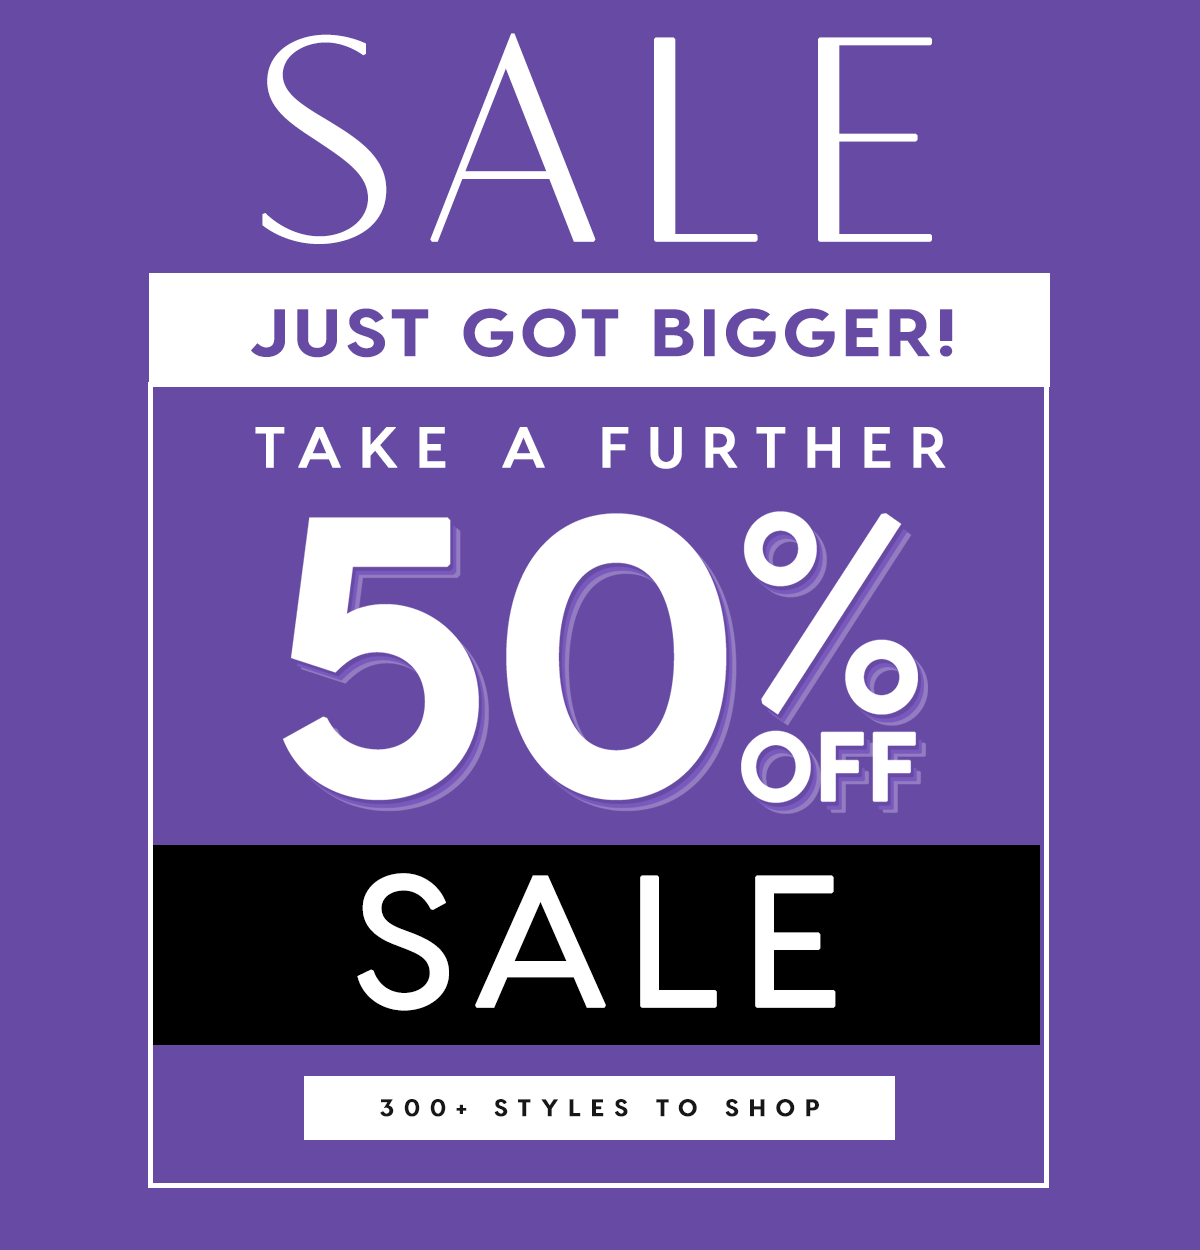 SALE just got bigger | Take a Further 50% Off Sale | 300+ Styles to Shop